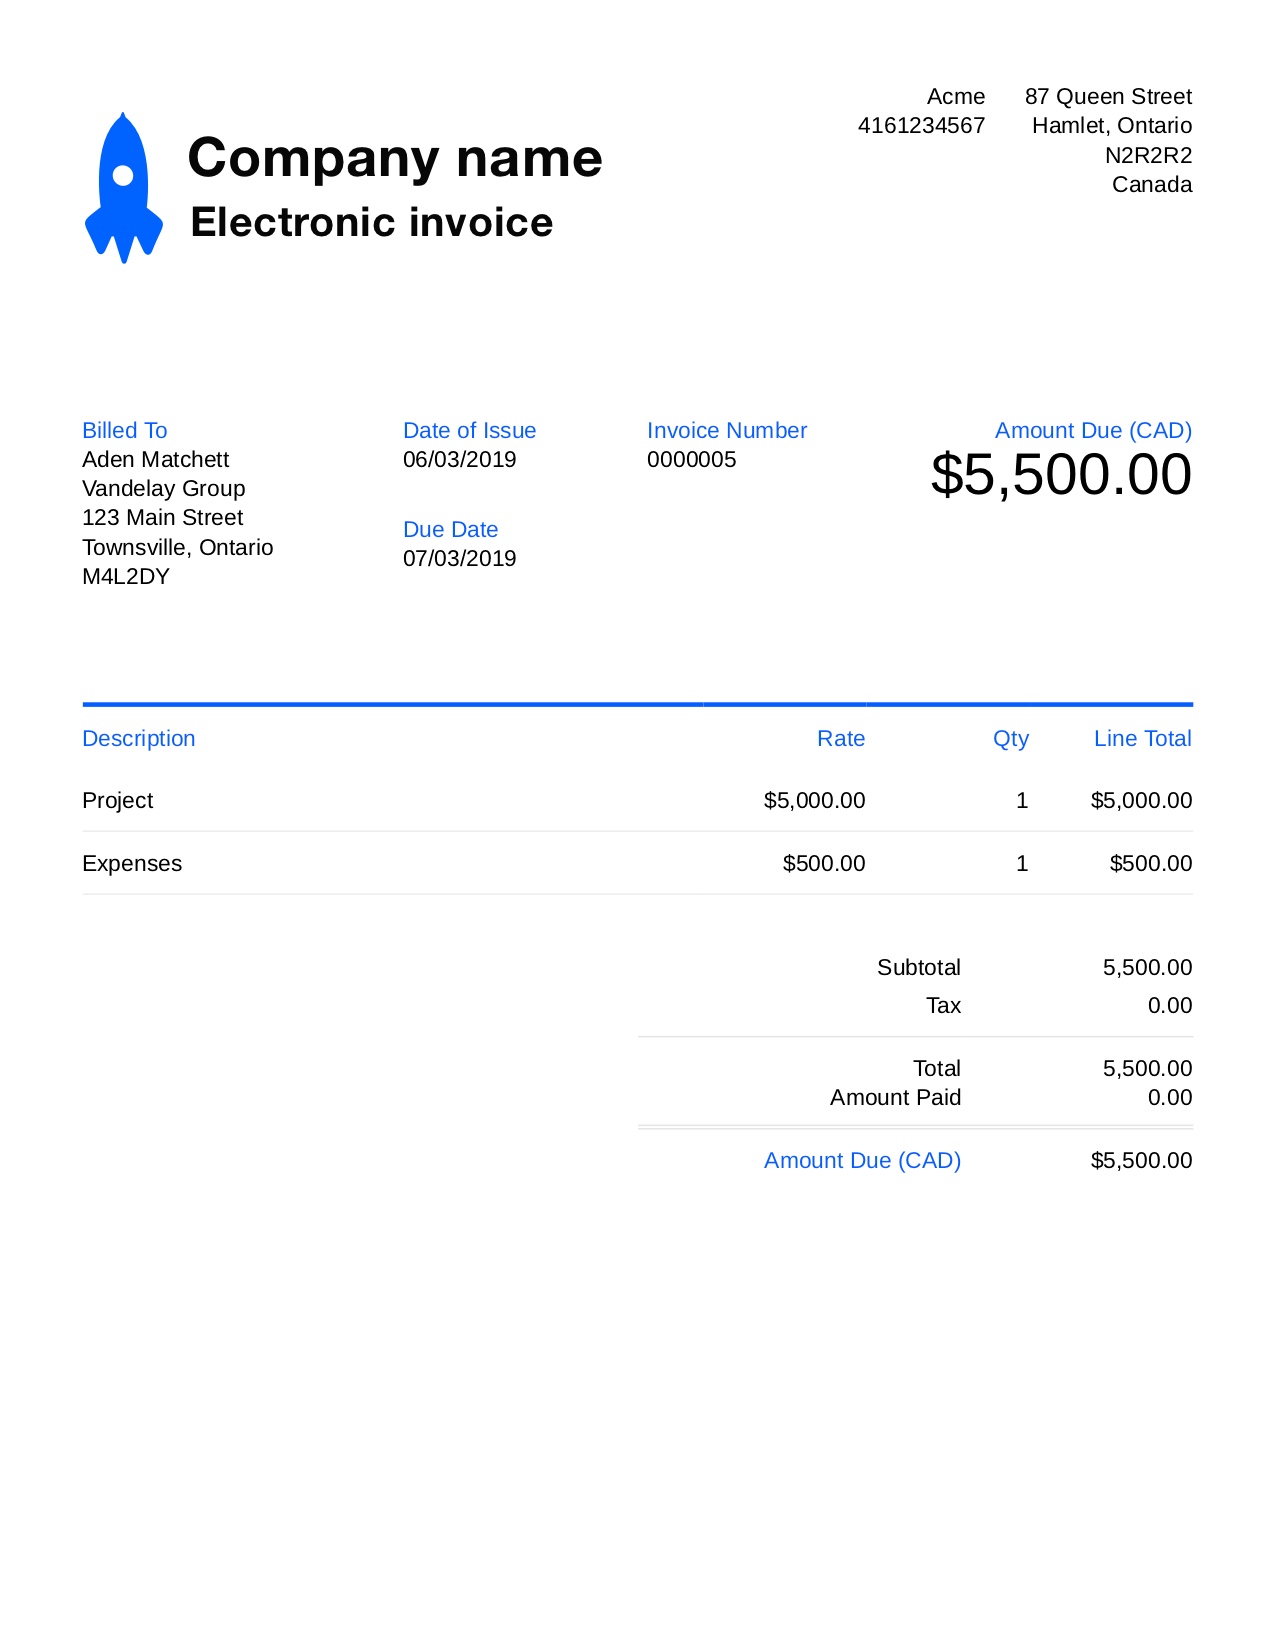 Free Electronic Invoice Template. Customize and Send in 90 Seconds